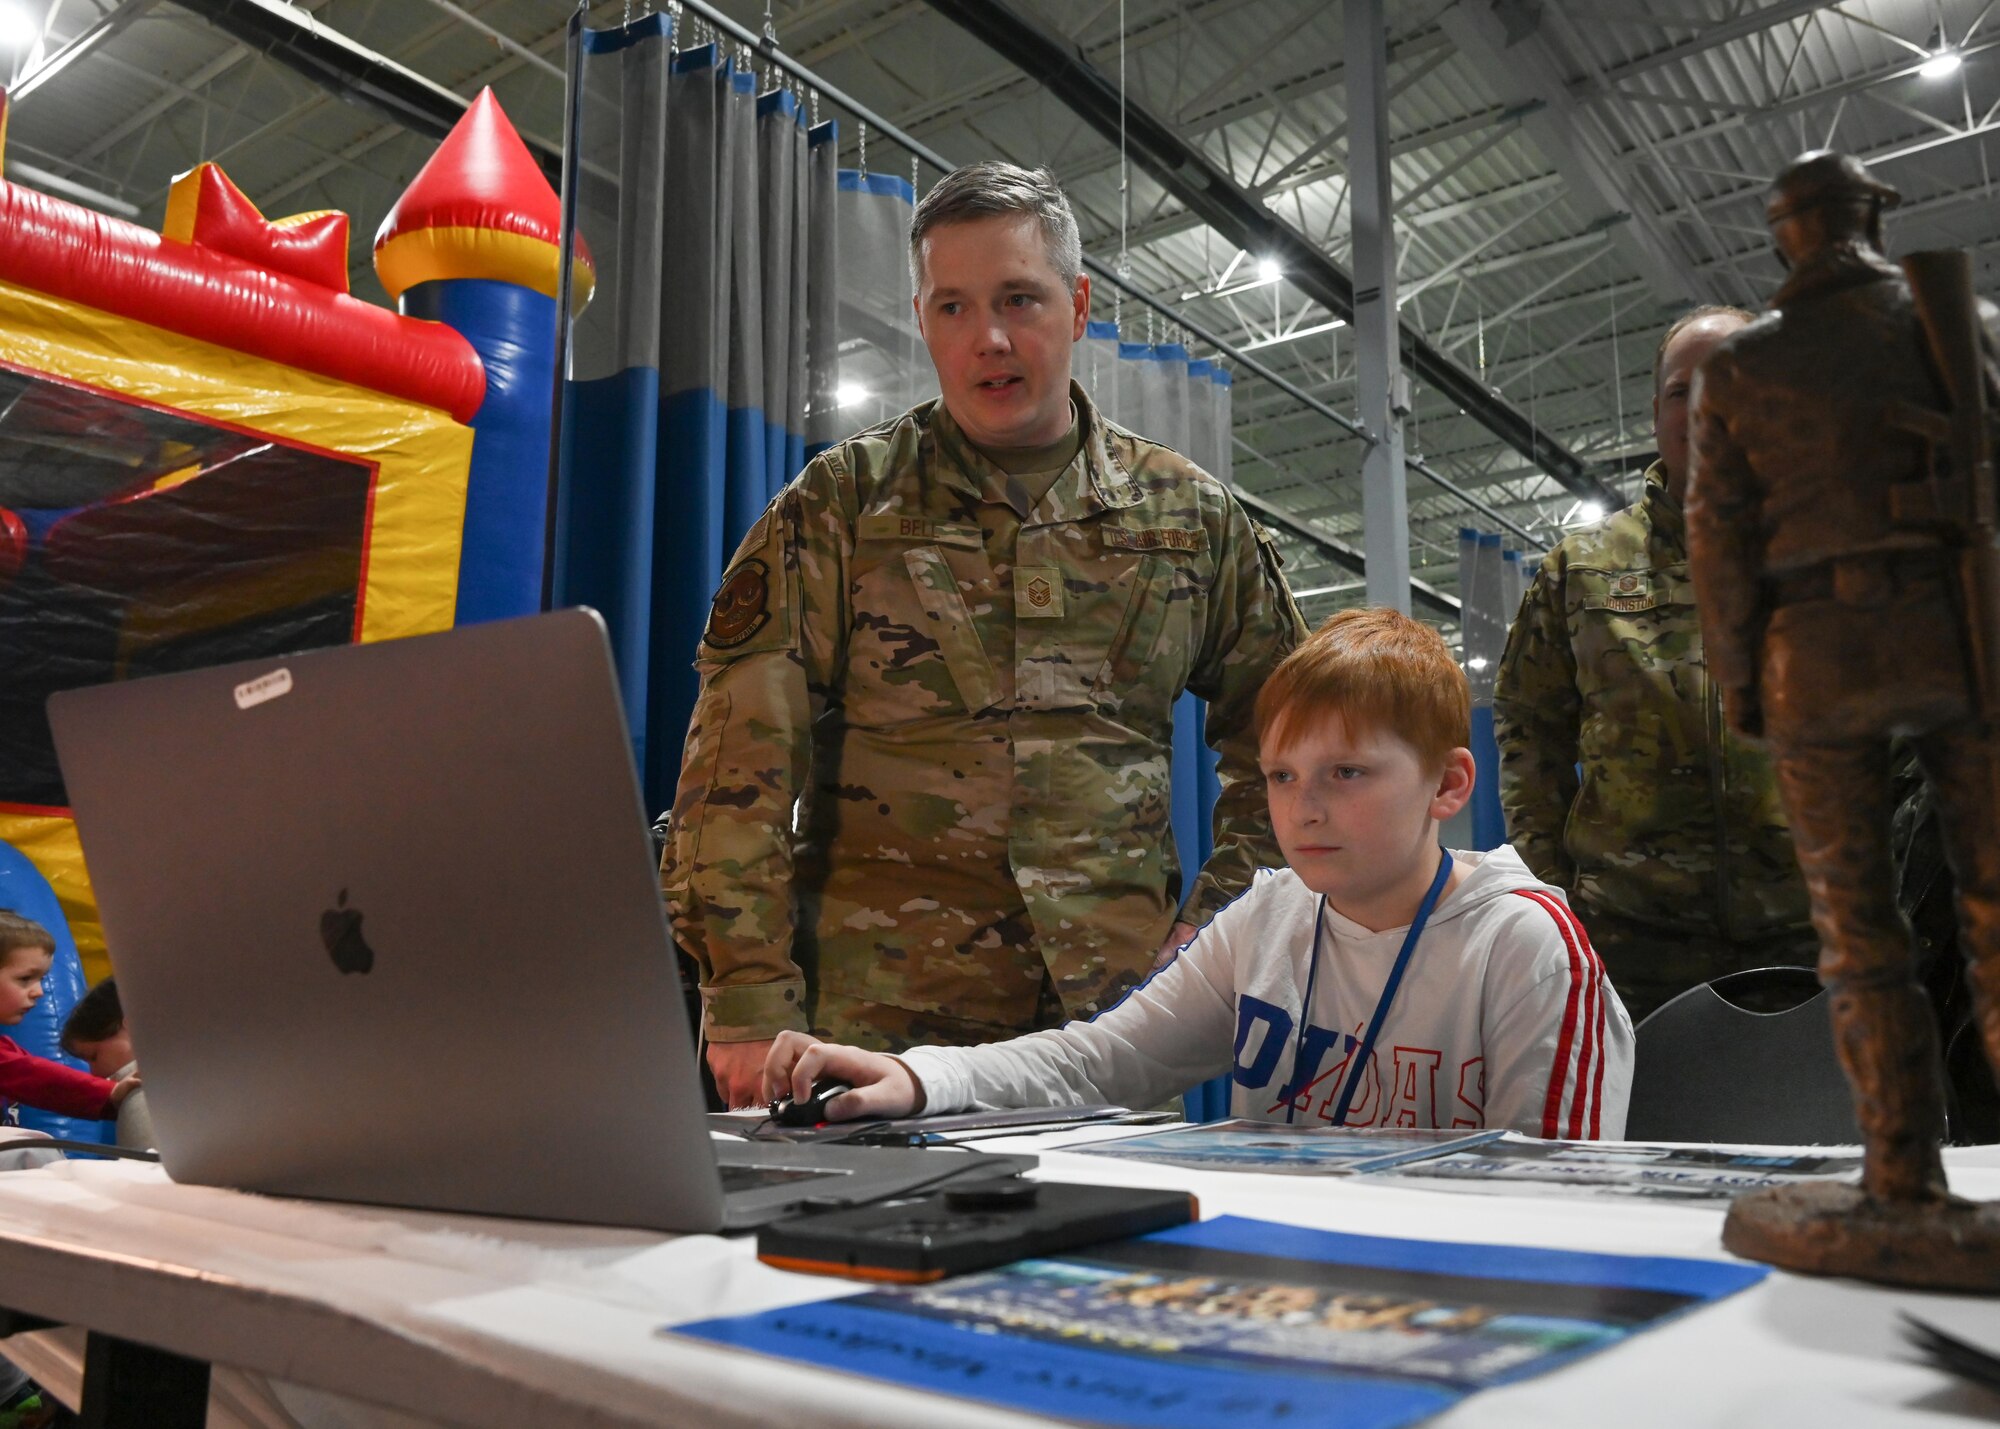 U.S. Air Force Master Sgt. Ryan Bell, 791st Missile Security Forces Squadron 5th Bomb Wing Public Affairs augmentee, teaches kids how to capture imagery and edit footage during Operation Hero at the Community Complex Center at Minot Air Force Base, North Dakota, Jan. 20, 2023. Airmen assigned to 20 different agencies from the 5th Bomb Wing and the 91st Missile Wing showcased their duties, conducted demonstrations, and provided interactive experiences to over 150 families. (U.S. Air Force photo by Senior Airman Caleb S. Kimmell)